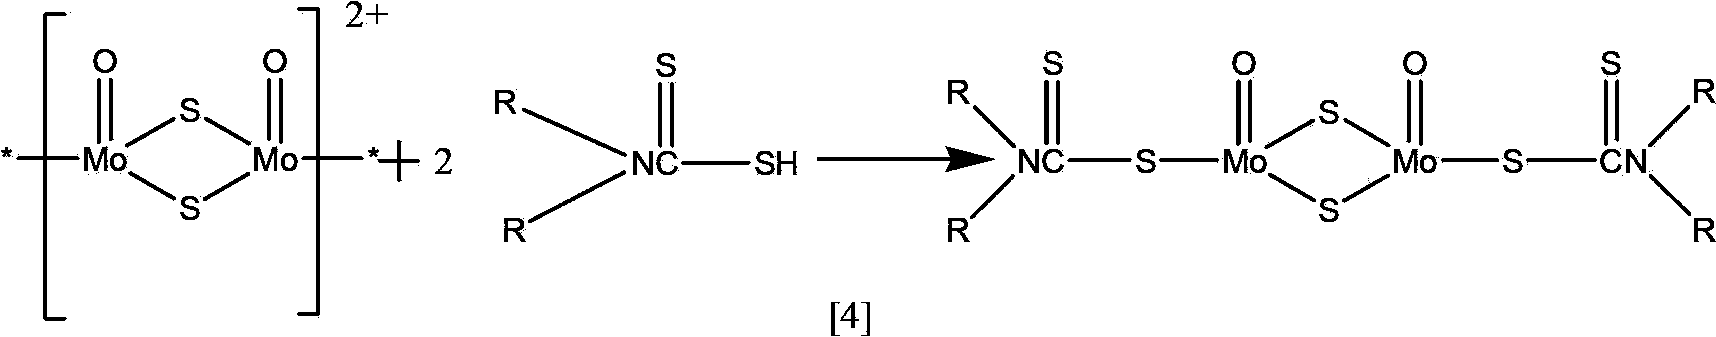 Oil-soluble molybdenum dialkyldithiocarbamate additive preparation method